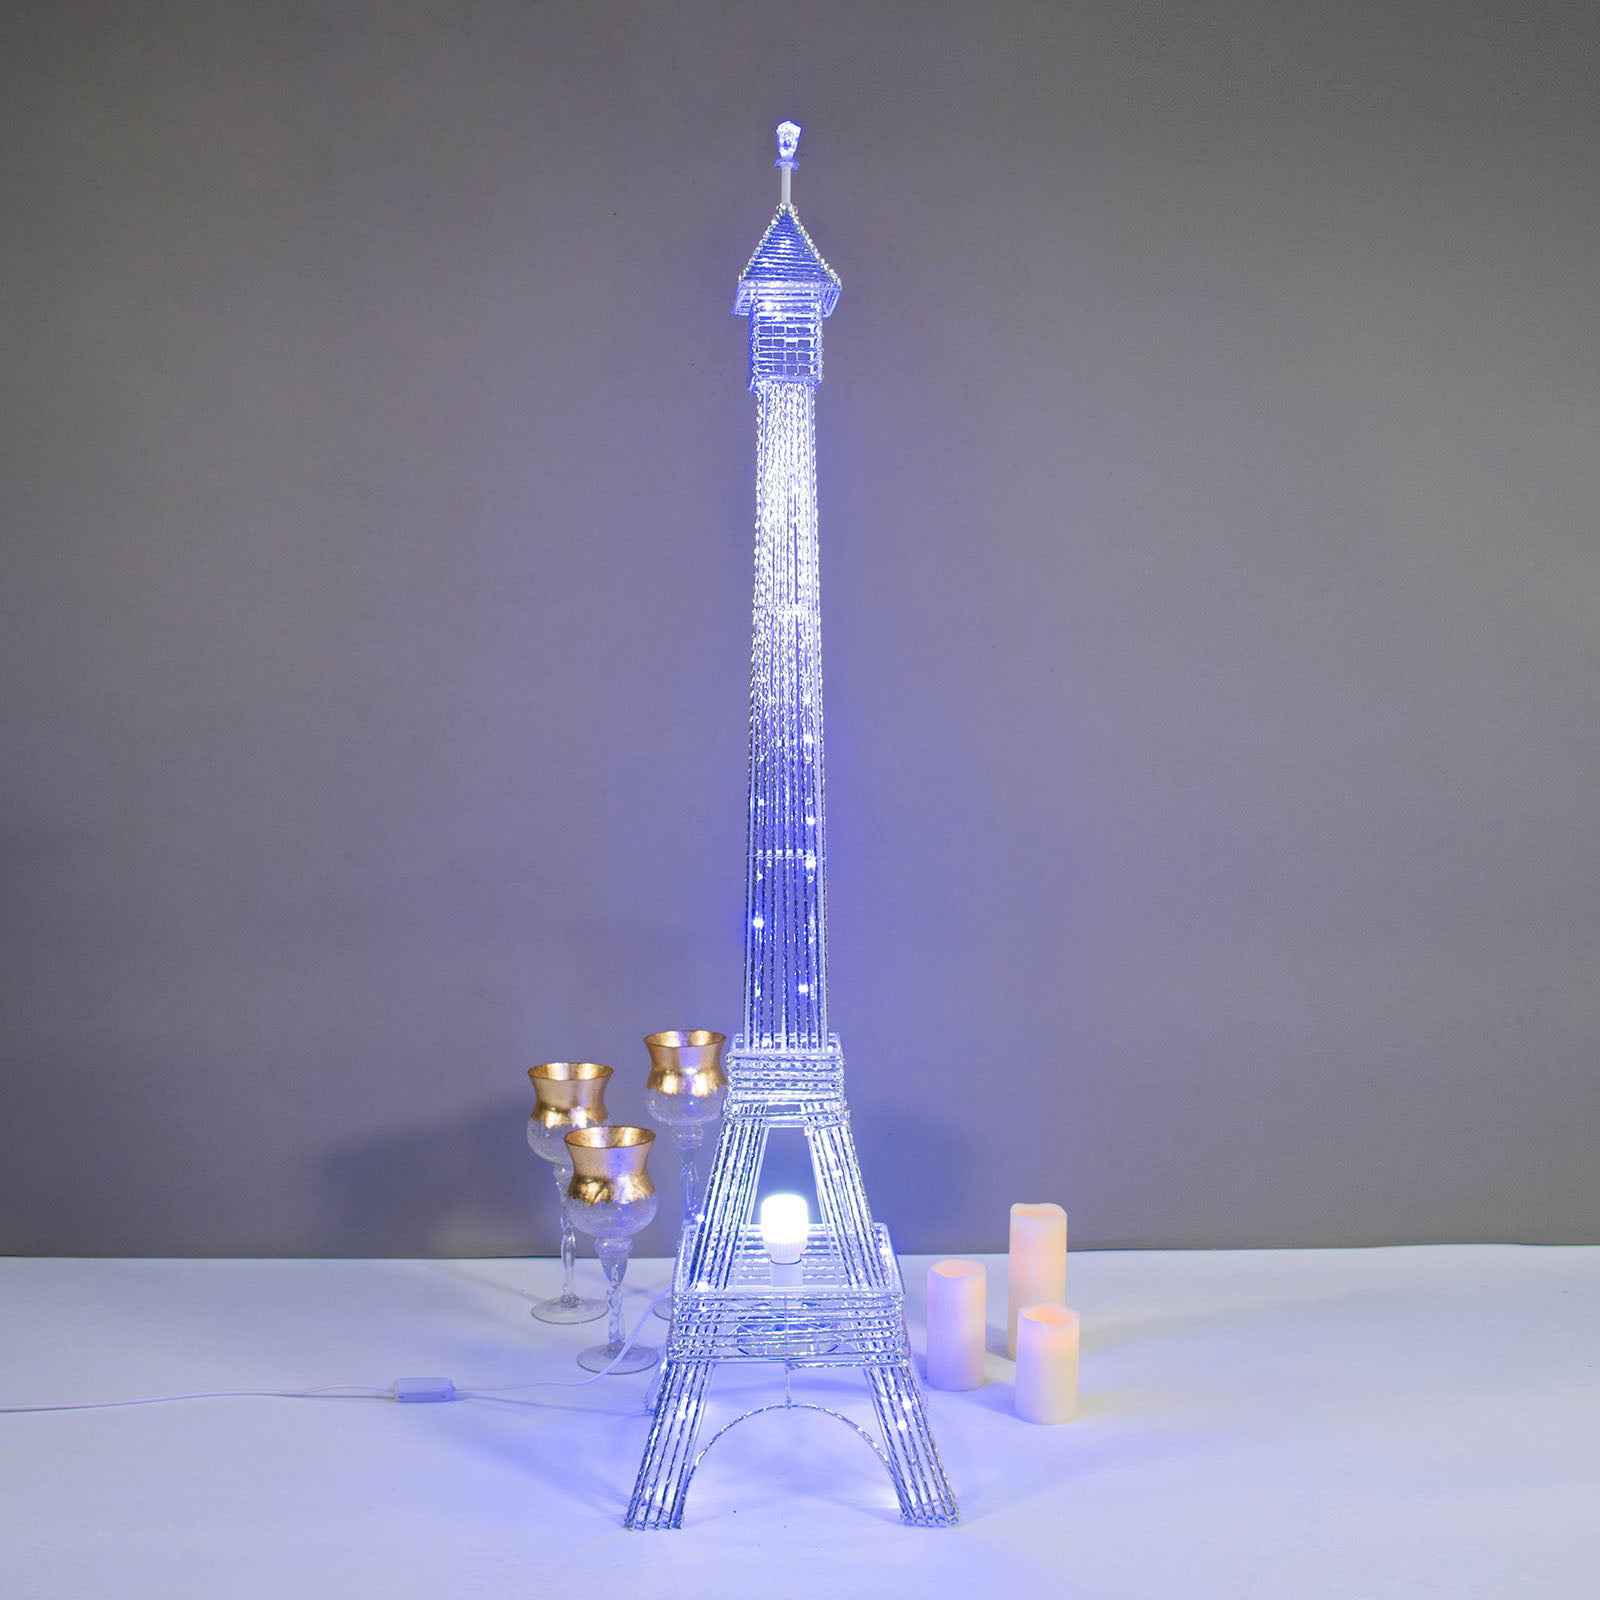 10 PC EIFFEL TOWER FIGURES CARD HOLDER PARTY FAVORS WEDDING BRIDAL QUINCEANERA 